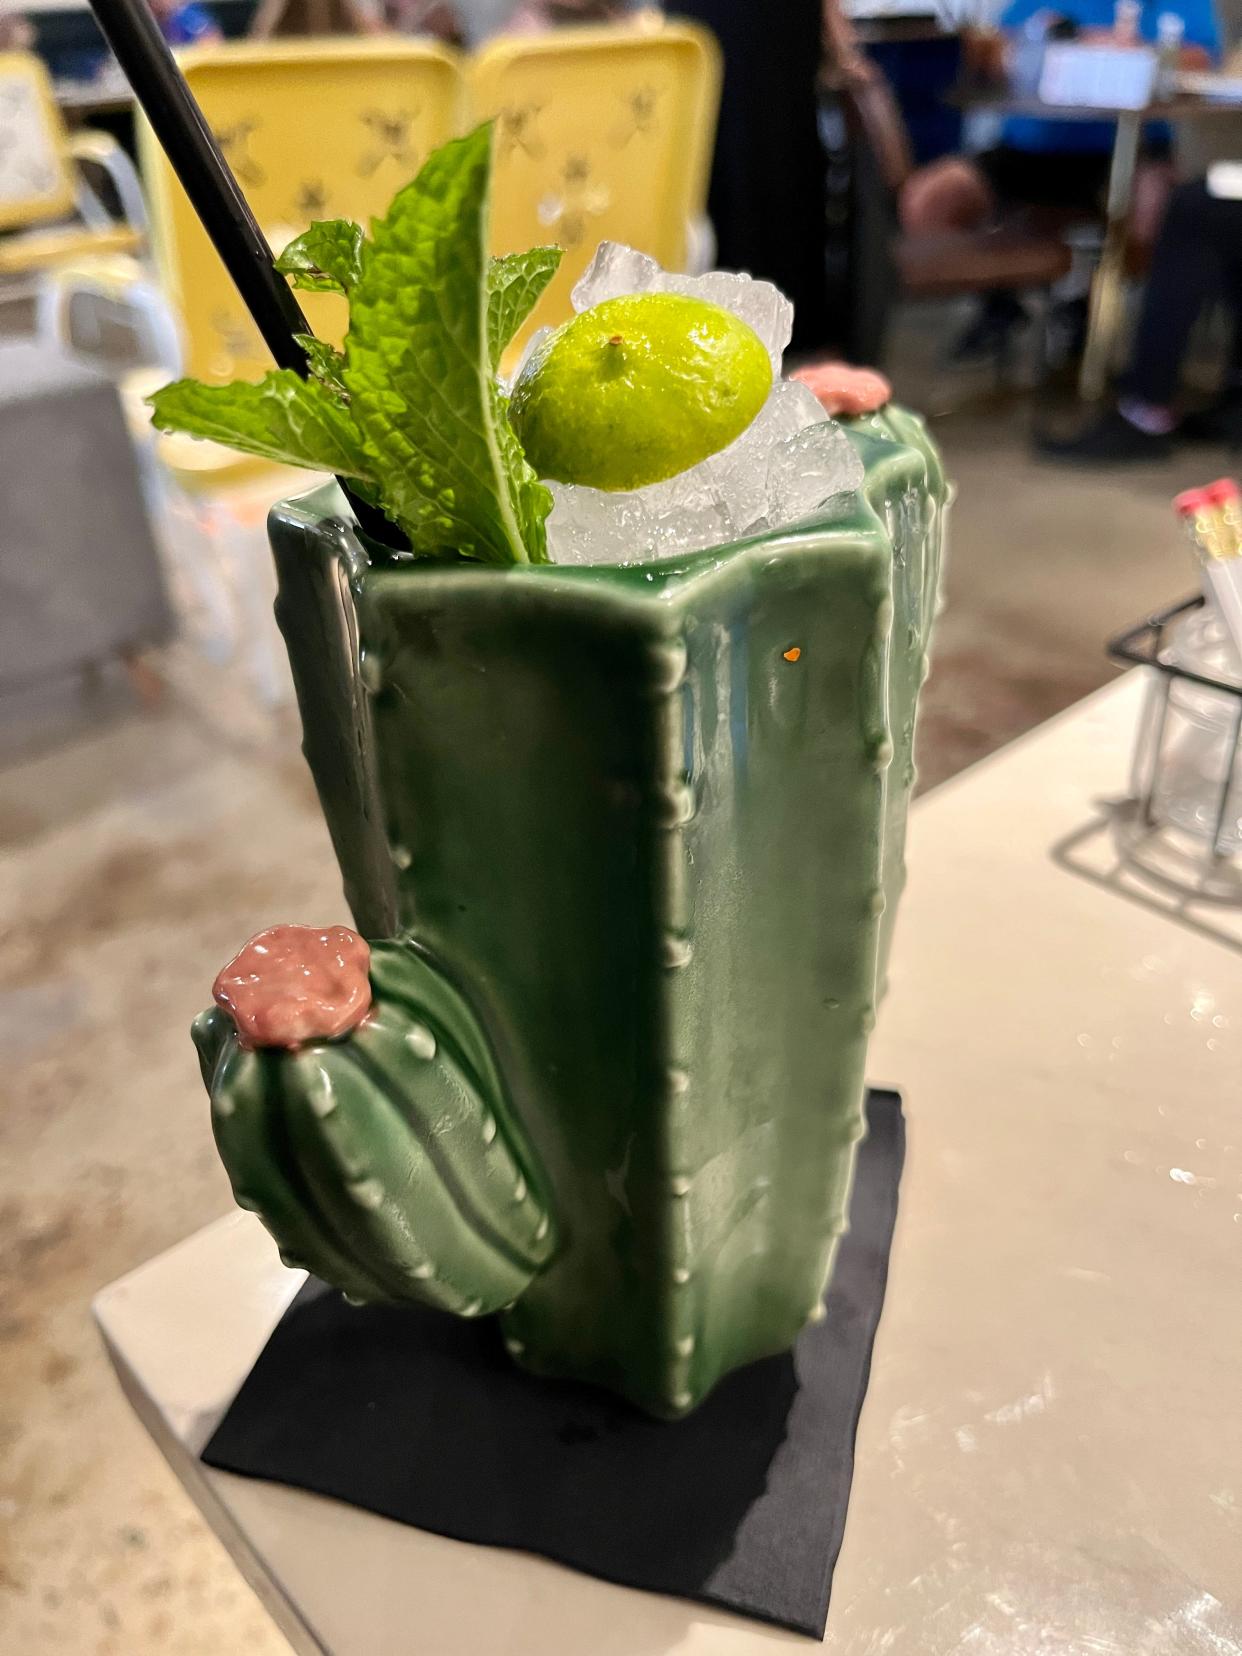 Tacocat's "Desert Daq" cocktail is made with Mexican rum, aloe, muskmelon, mint, Key and Persian lime juices.